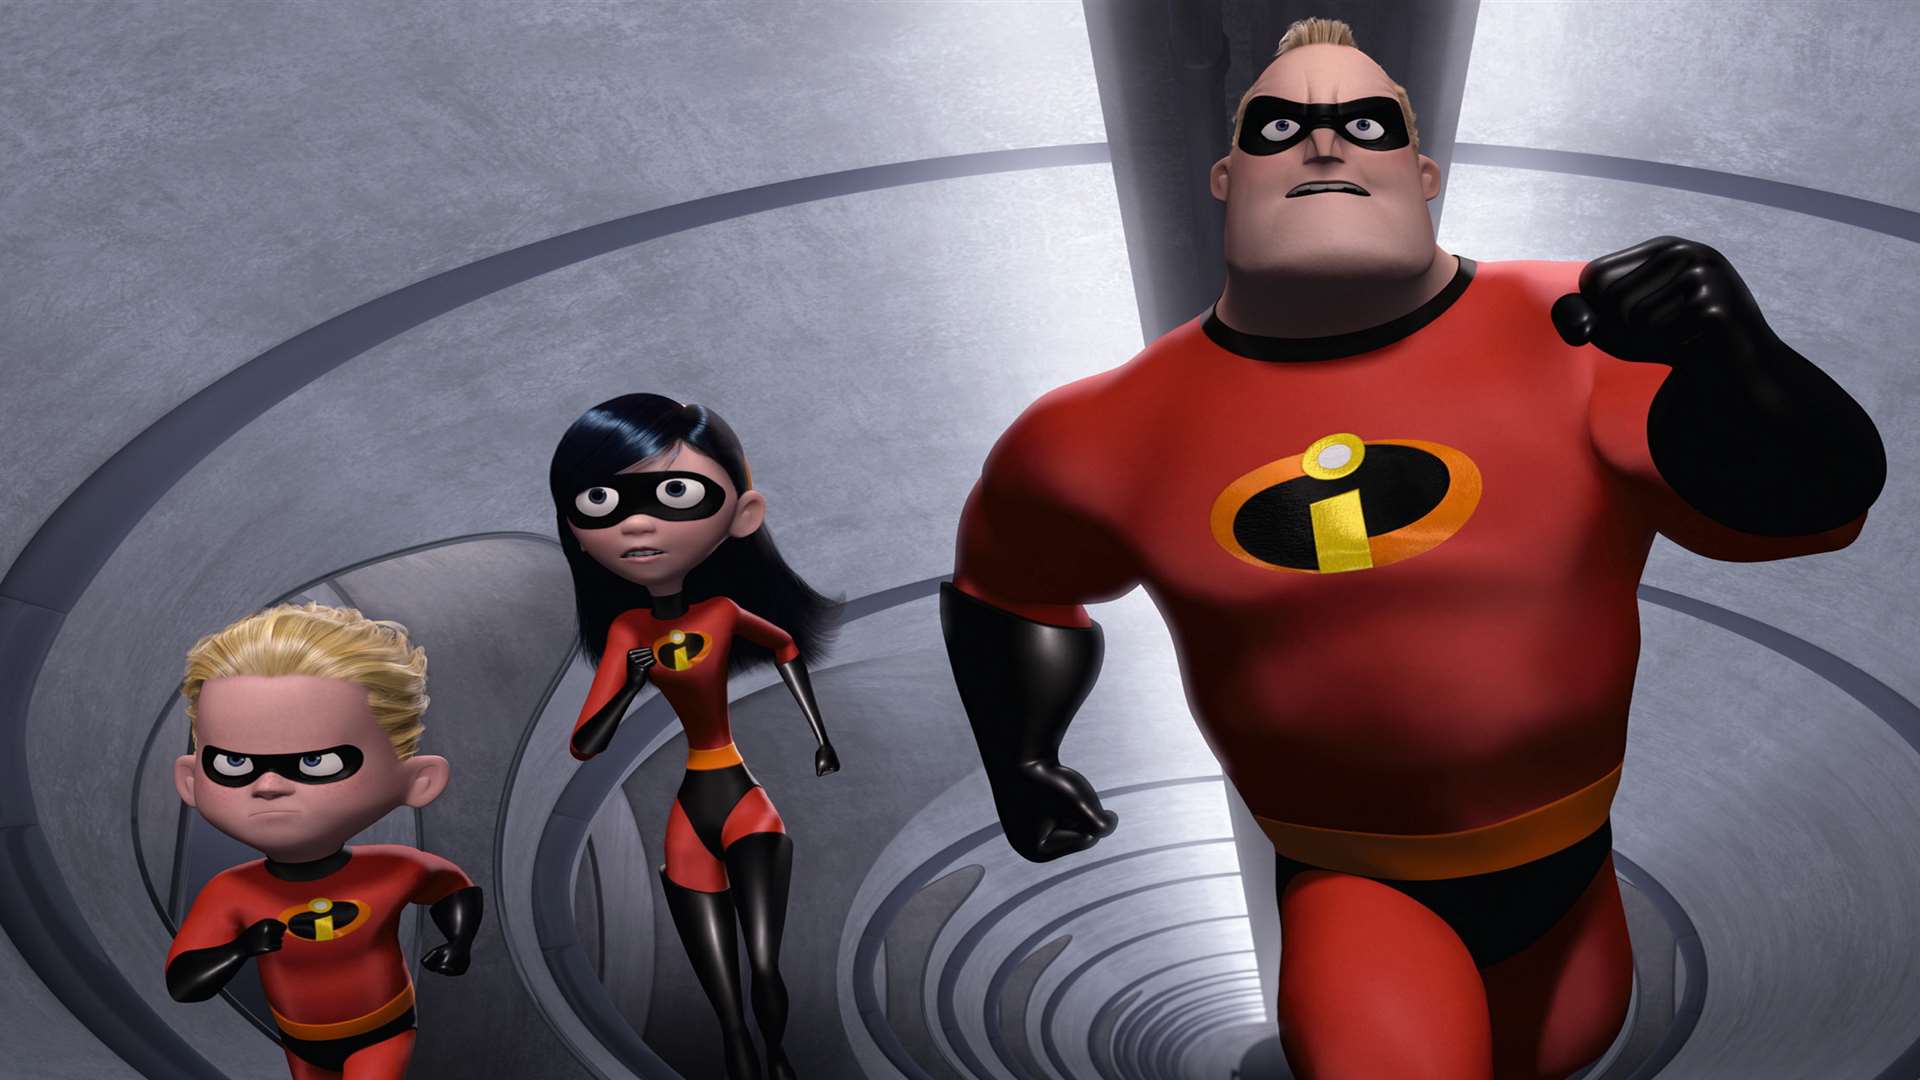 The Incredibles was a triumph for Brad Bird, who returns in 2015 with Tomorrowland